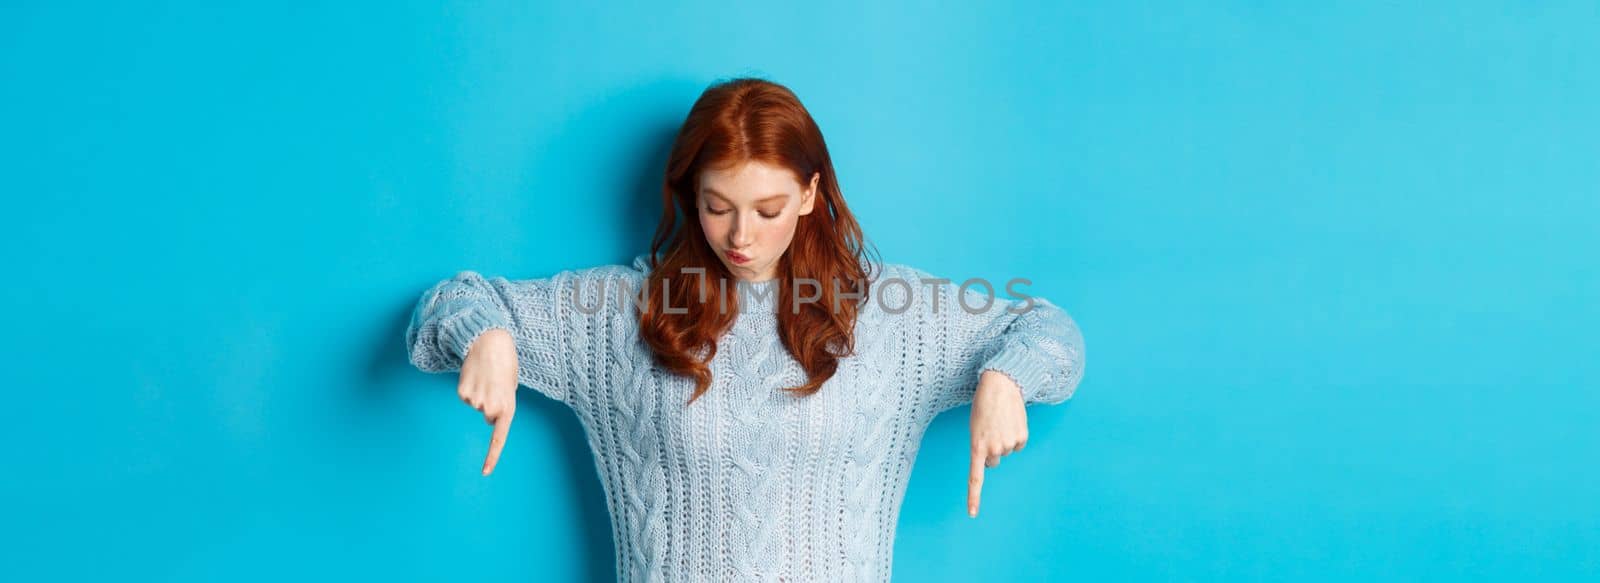 Winter holidays and people concept. Intrigued redhead girl, pointing and looking down thoughtful, making choice, standing over blue background.